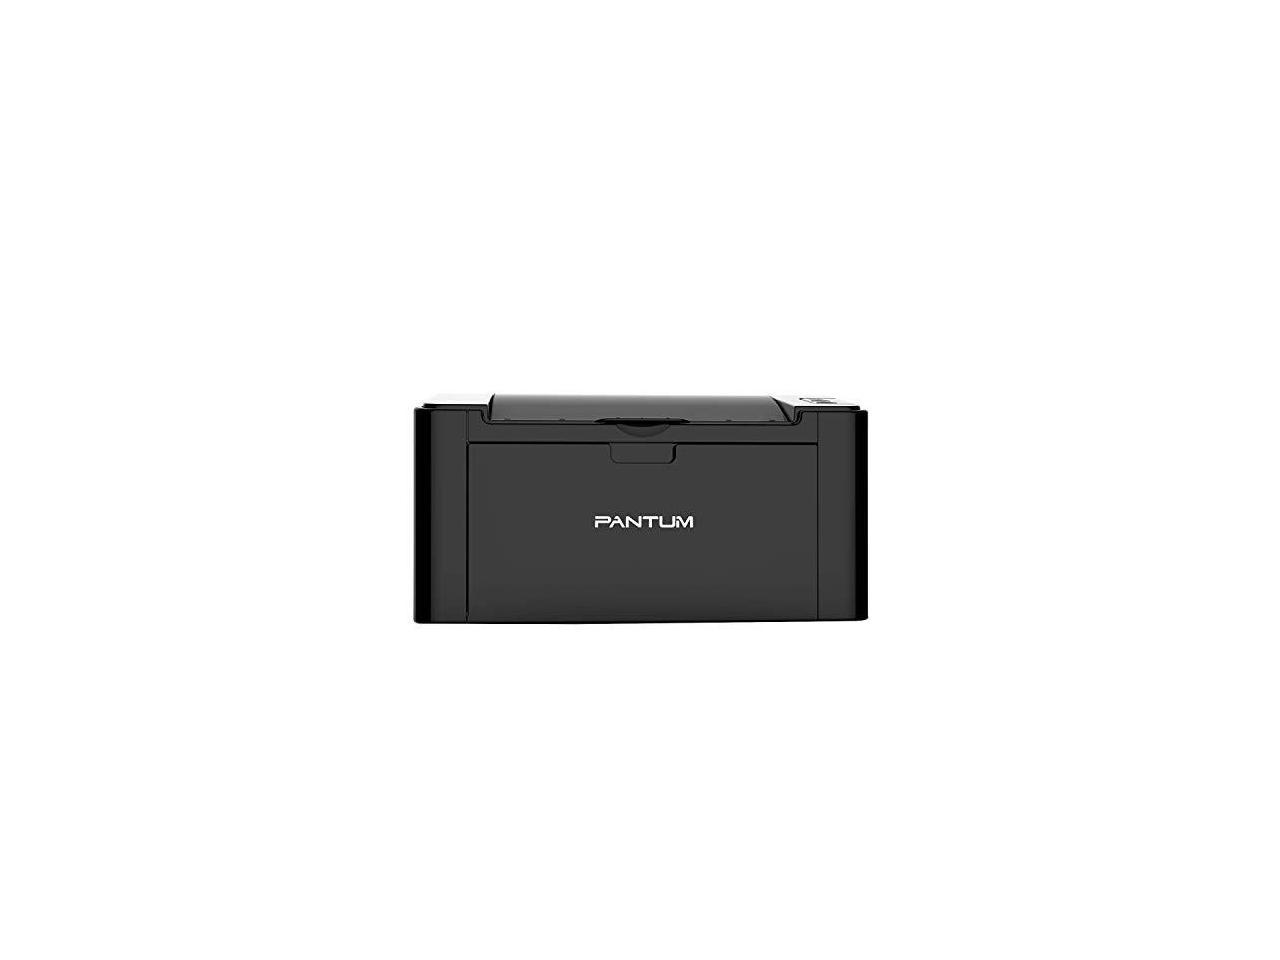 P2502W Monochrome Laser Printer with Wireless Networking and Mobile Printing